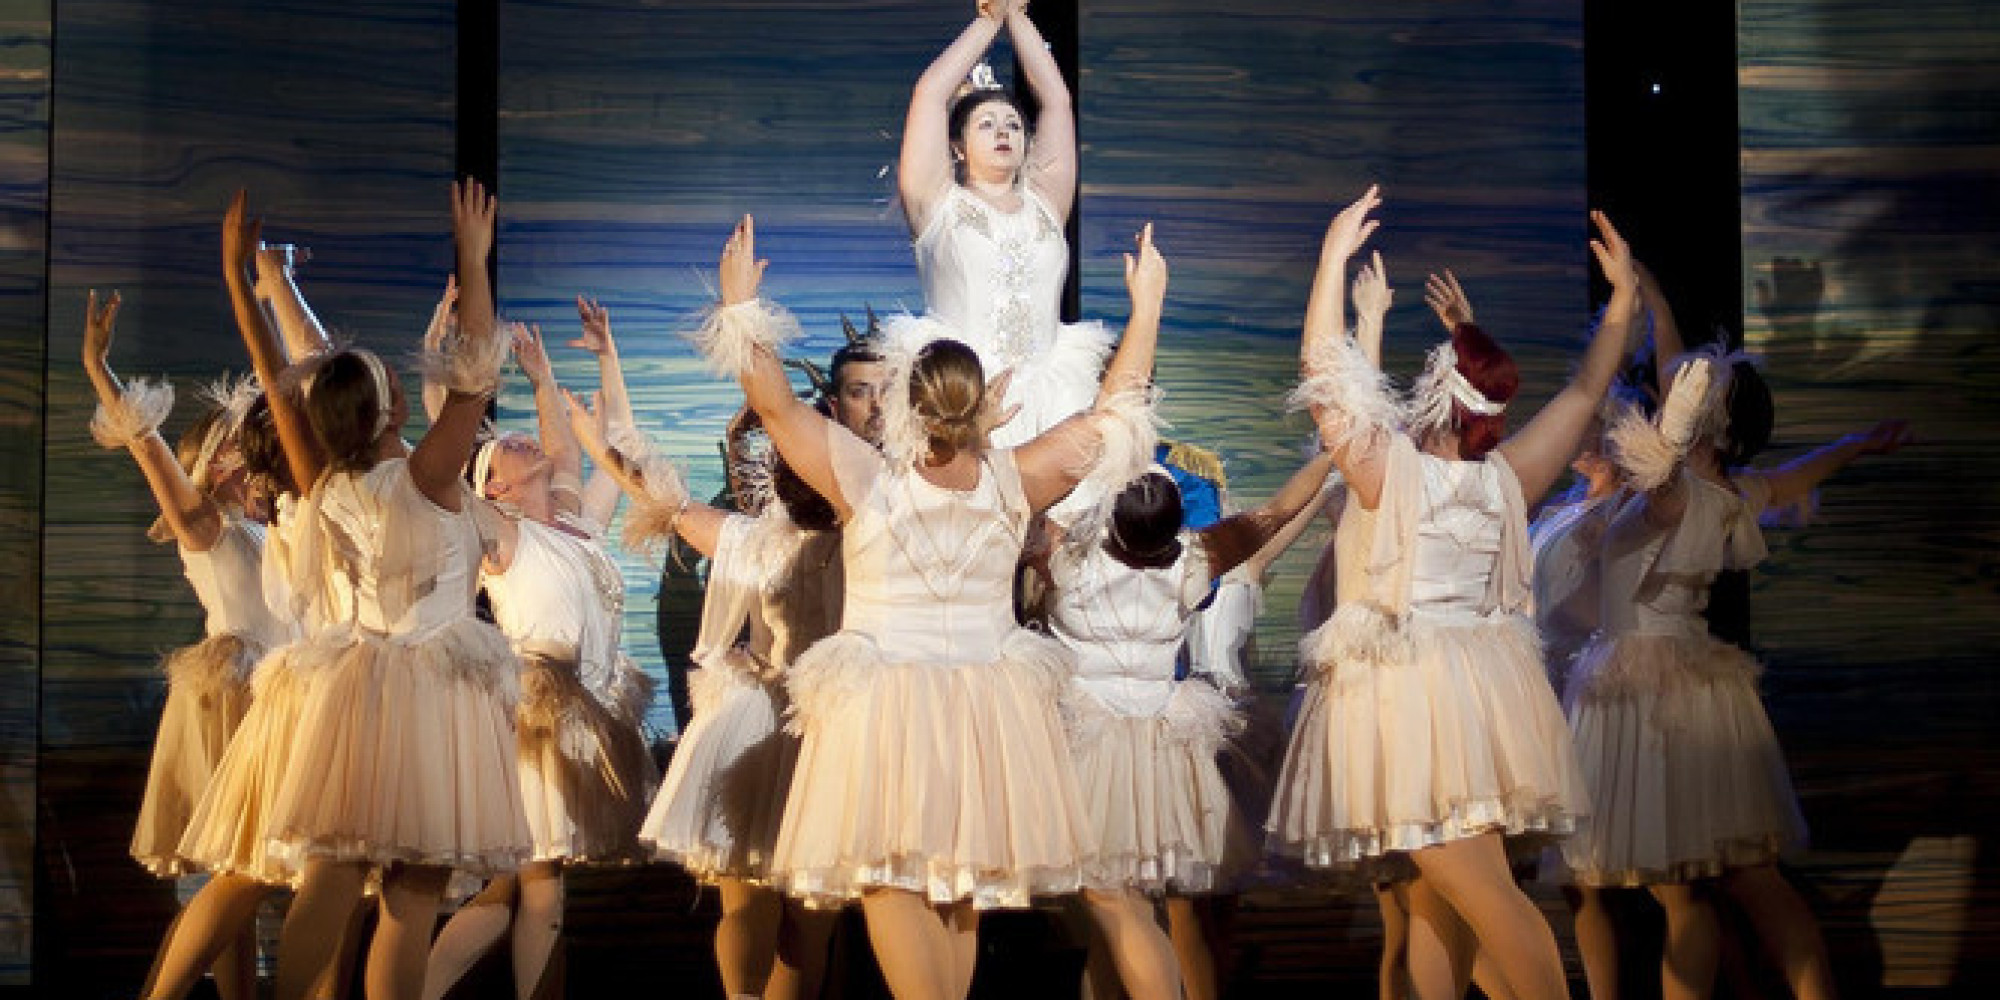 Big Ballet Hopefuls Given Their Swan Lake Parts Twitter Reacts